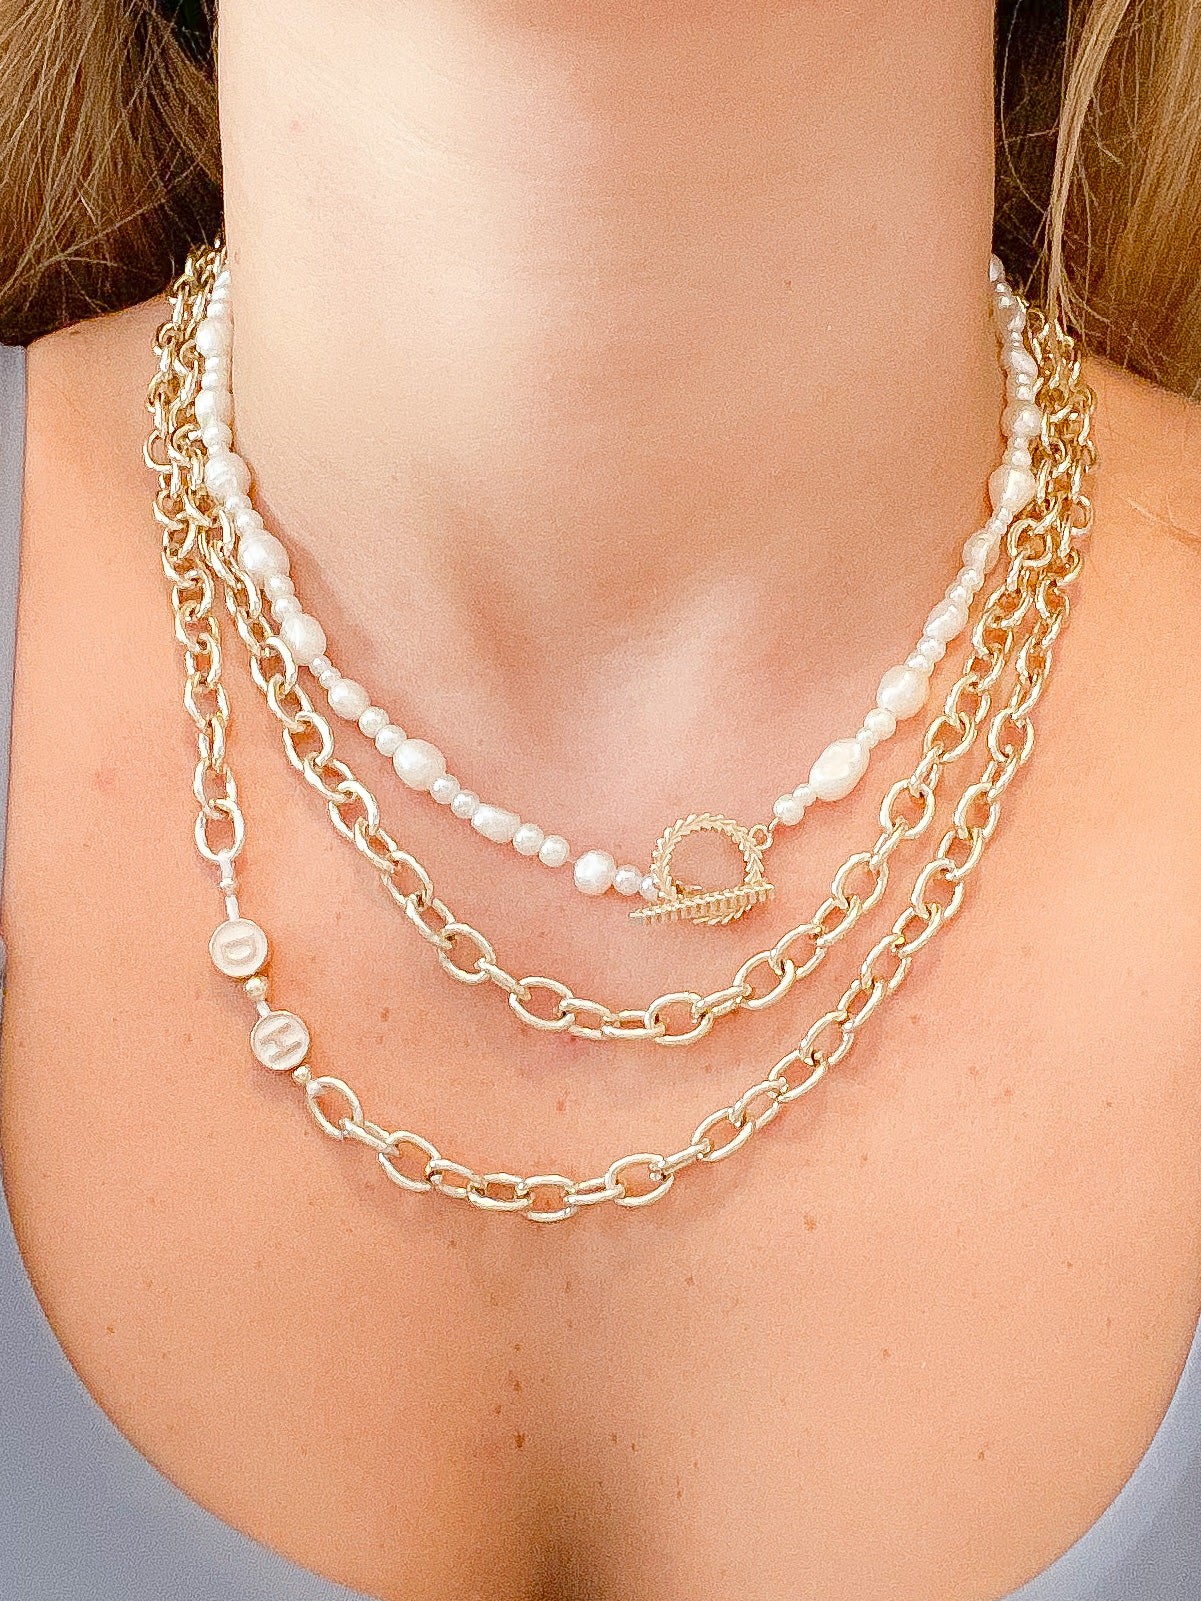 PEARLY GIRLY NECKLACE